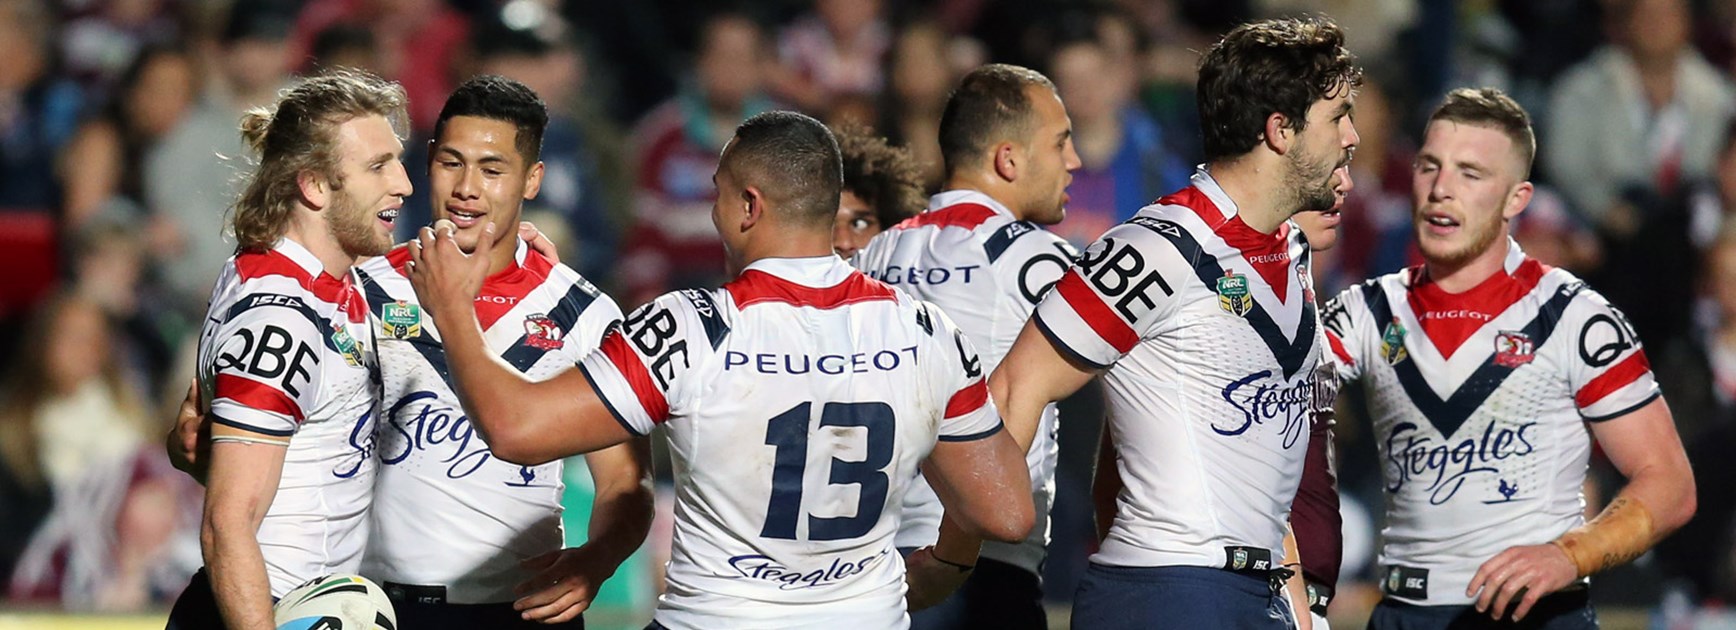 Roosters players celebrate during their Round 25 win over the Sea Eagles.